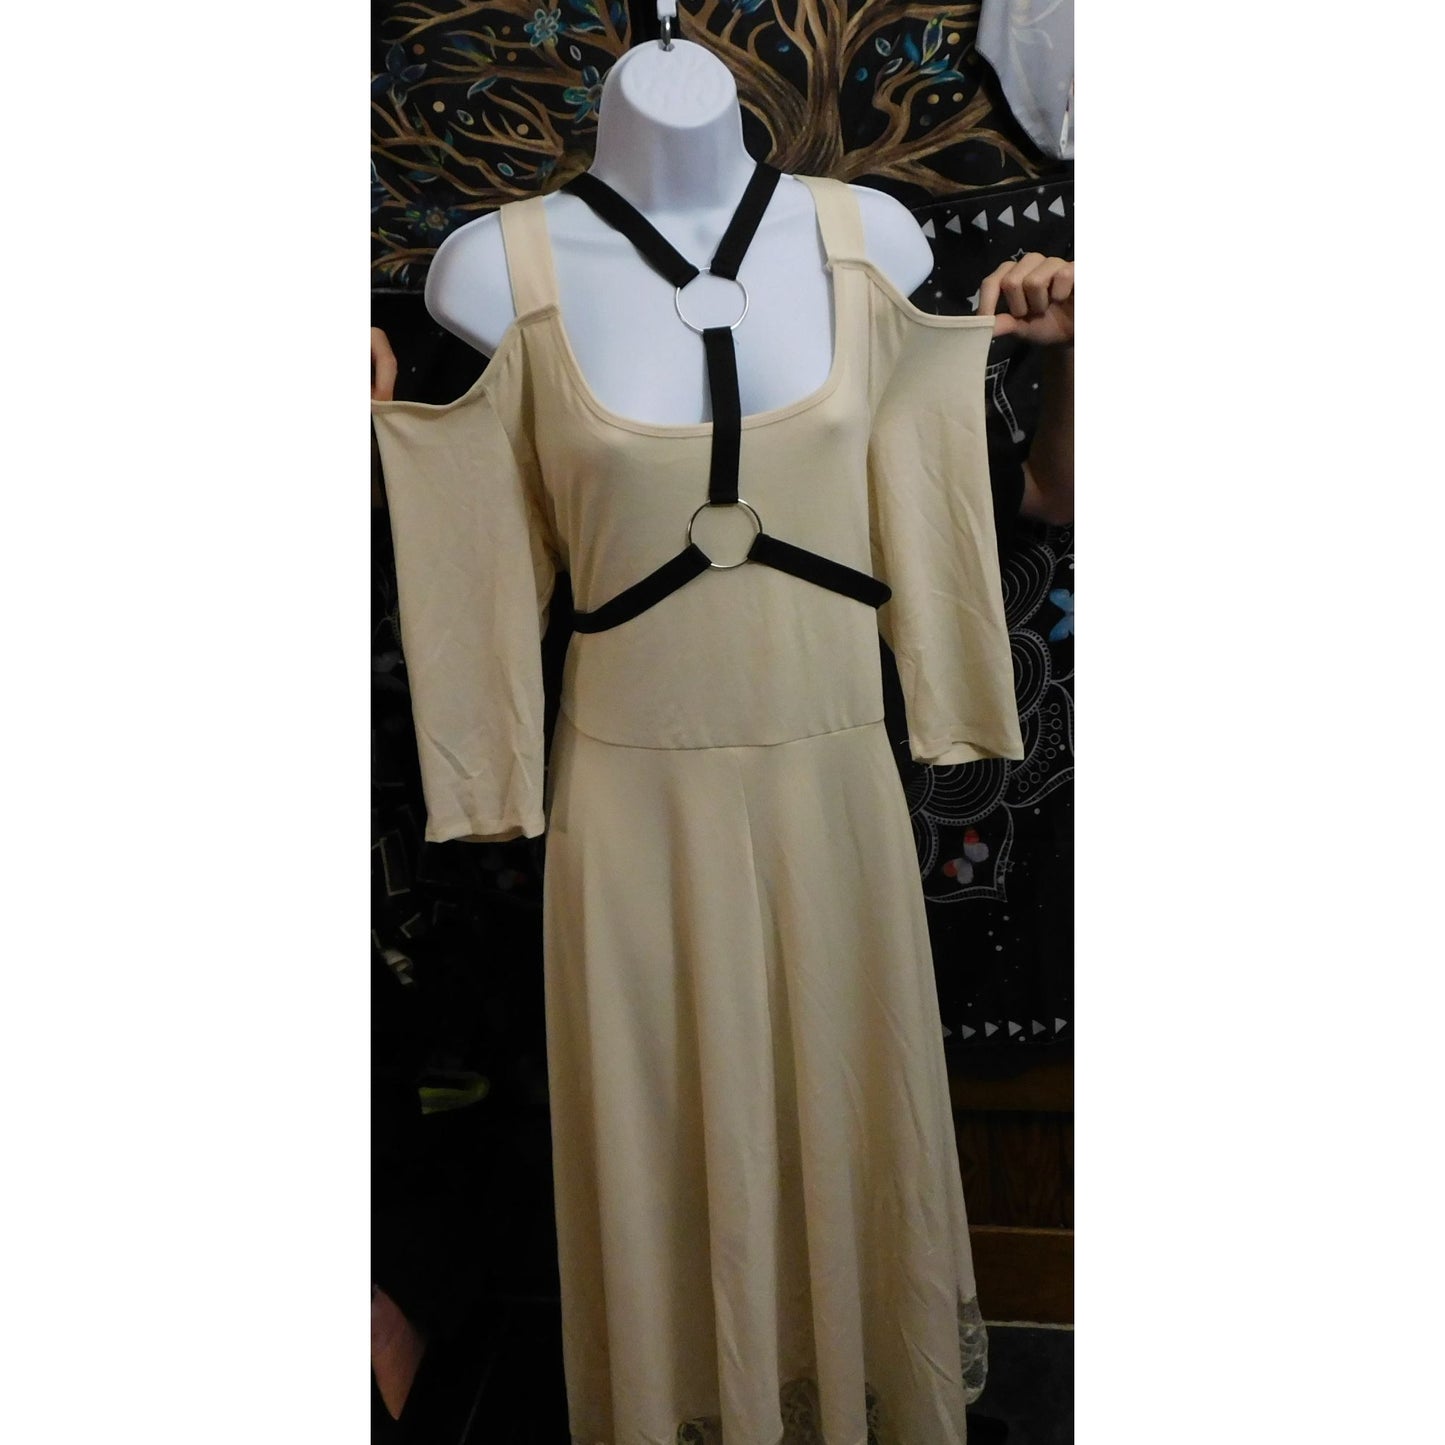 Hot Topic Ivory O-Ring Harness Cold Shoulder Dress NWT